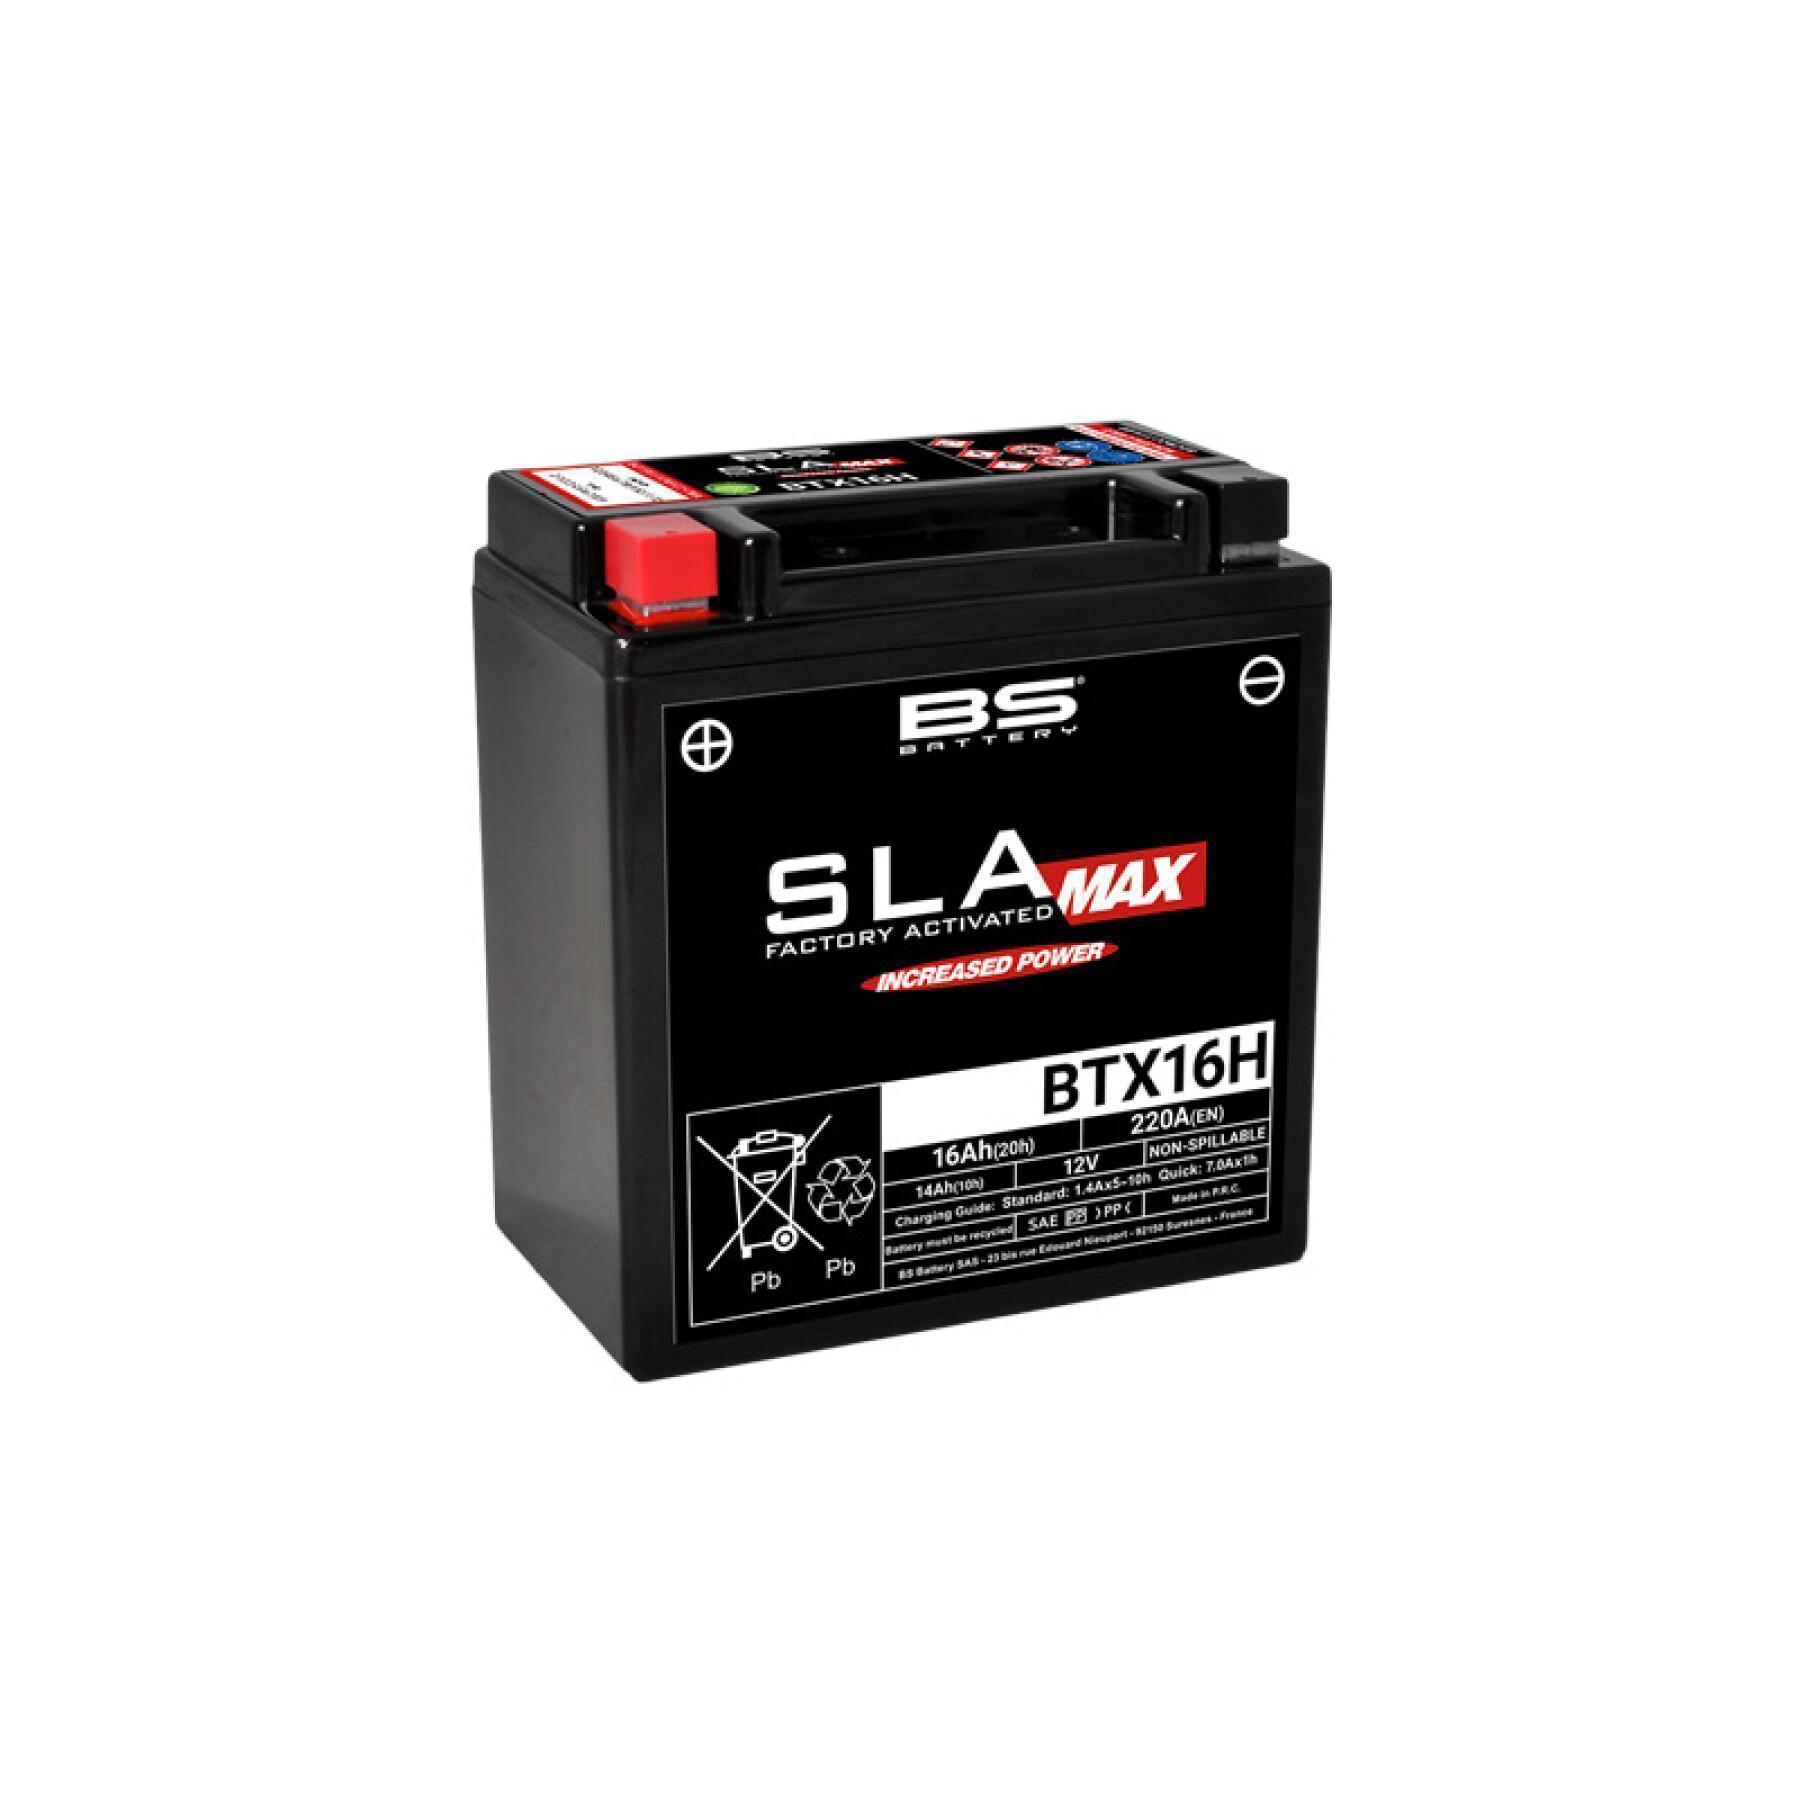 Factory-activated motorcycle battery BS Battery BTX16H